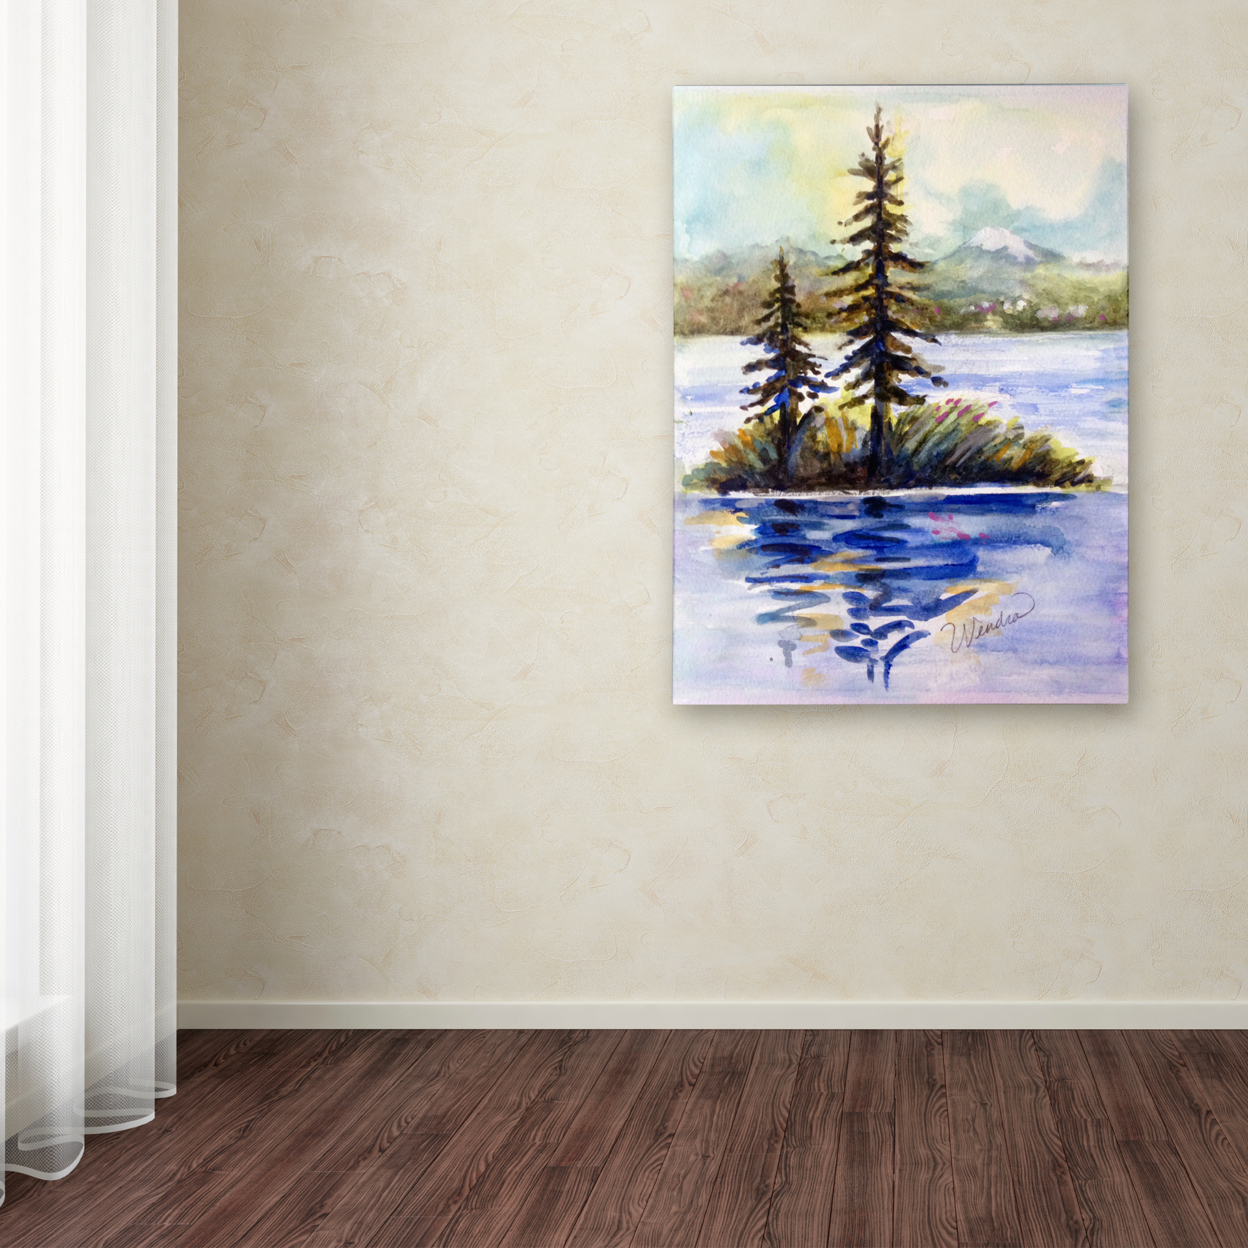 Wendra 'Island Light' Canvas Wall Art 35 X 47 Inches